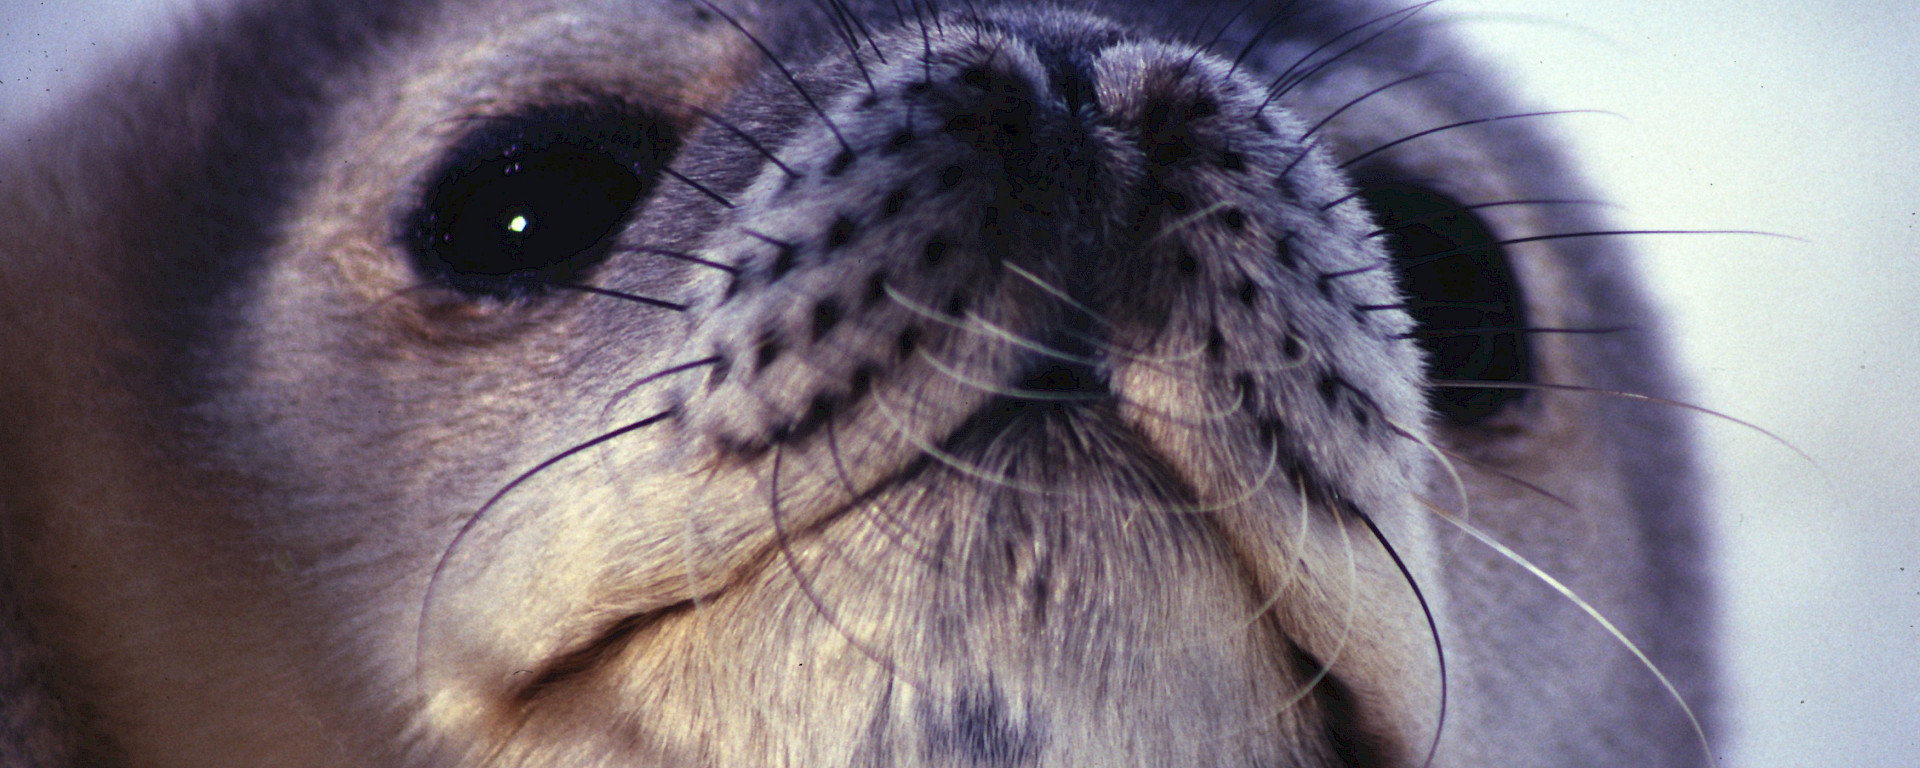 Very close-up shot of the furry nose and whiskers of a Weddell Seal pup